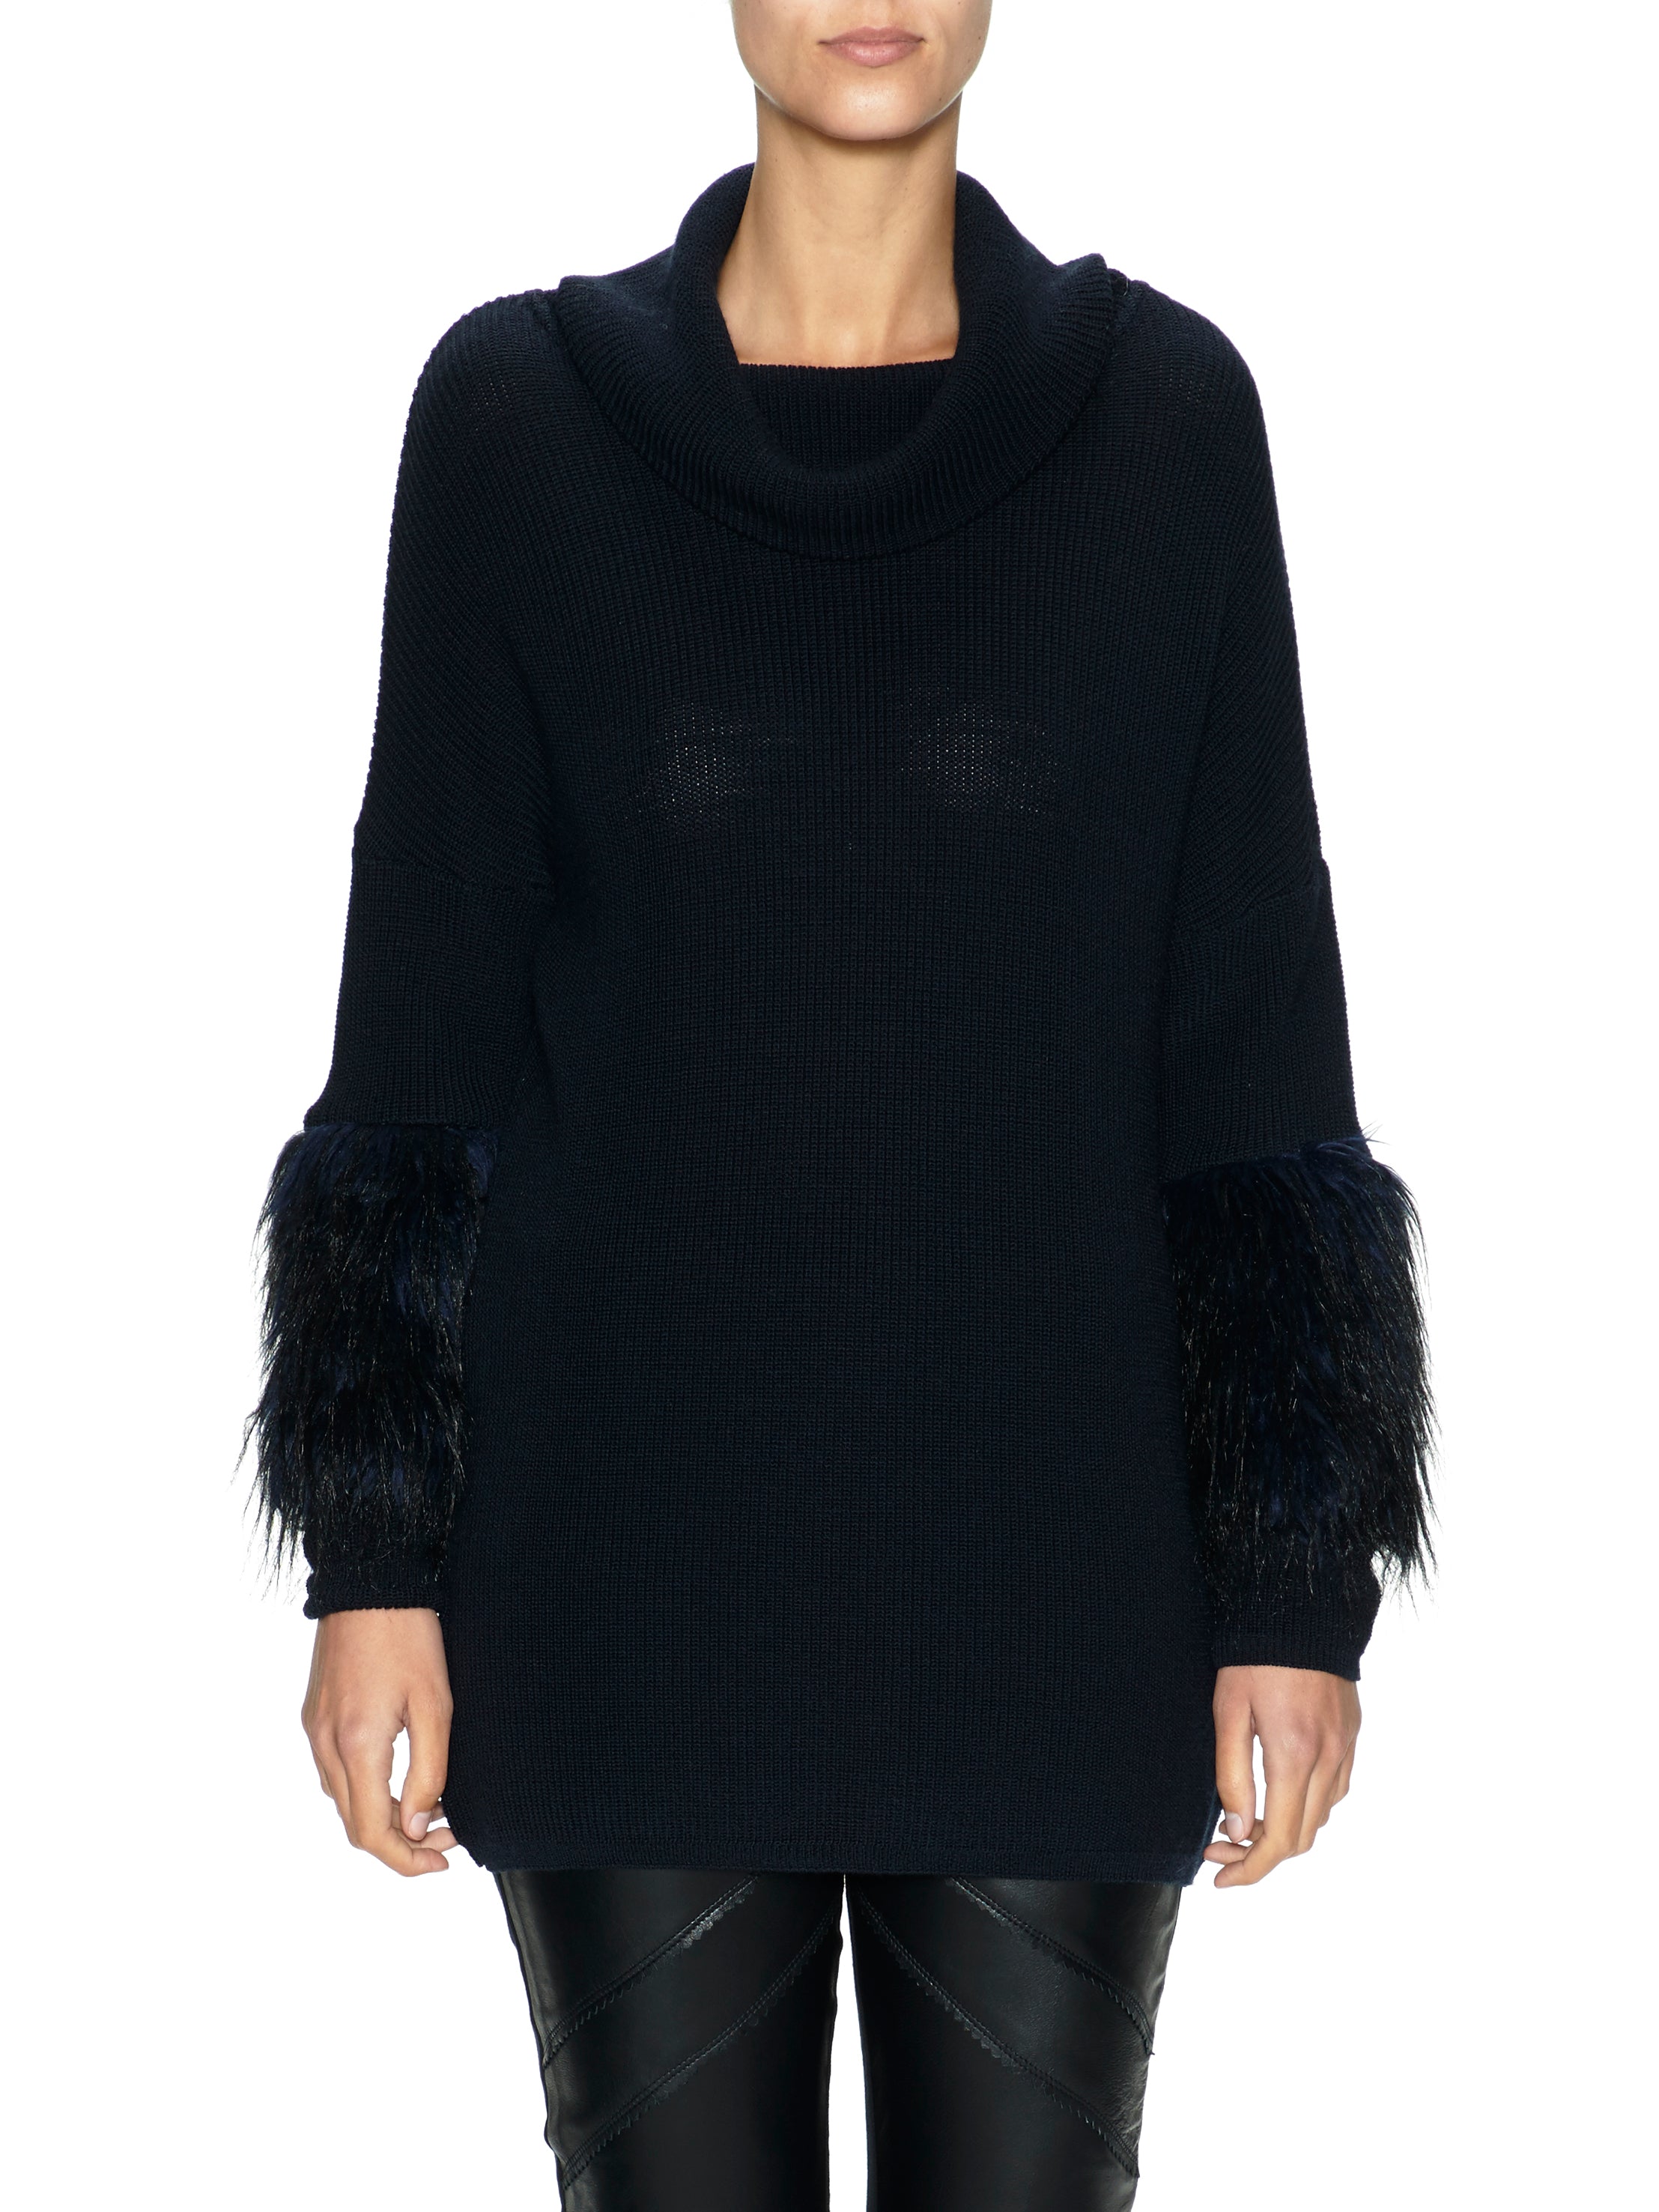 SABATINI Knit Jumper with Faux Fur Sleeves